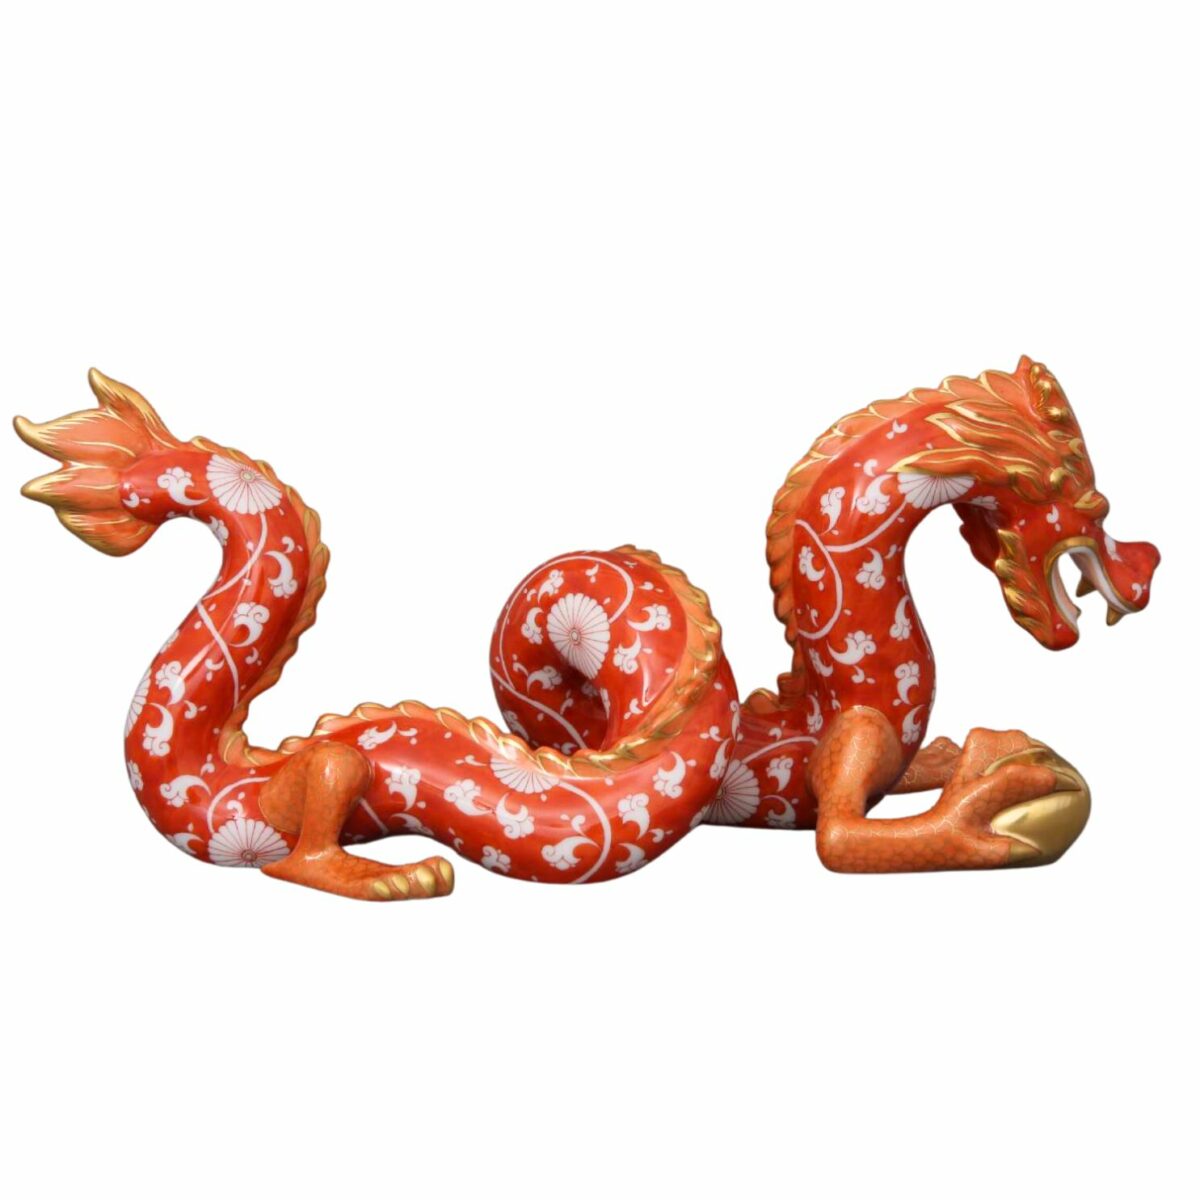 Herend-Dragon-Large-Figurine-Chinese-Zodiac-15601-0-00-CHRY-1